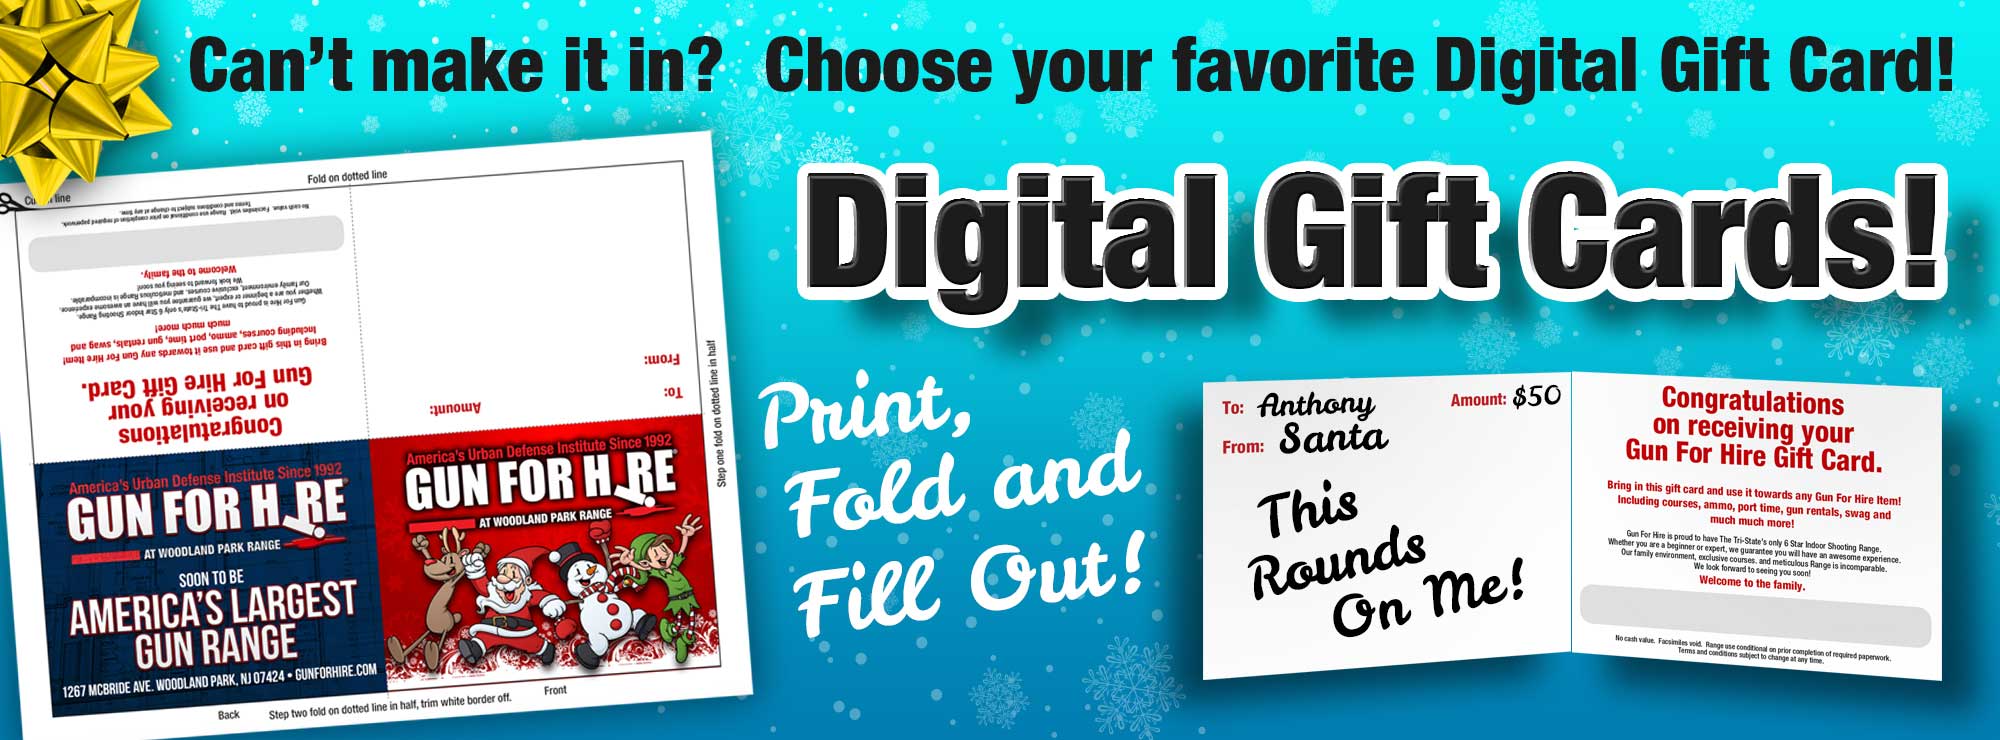 Digital Gift Cards - Gift Cards